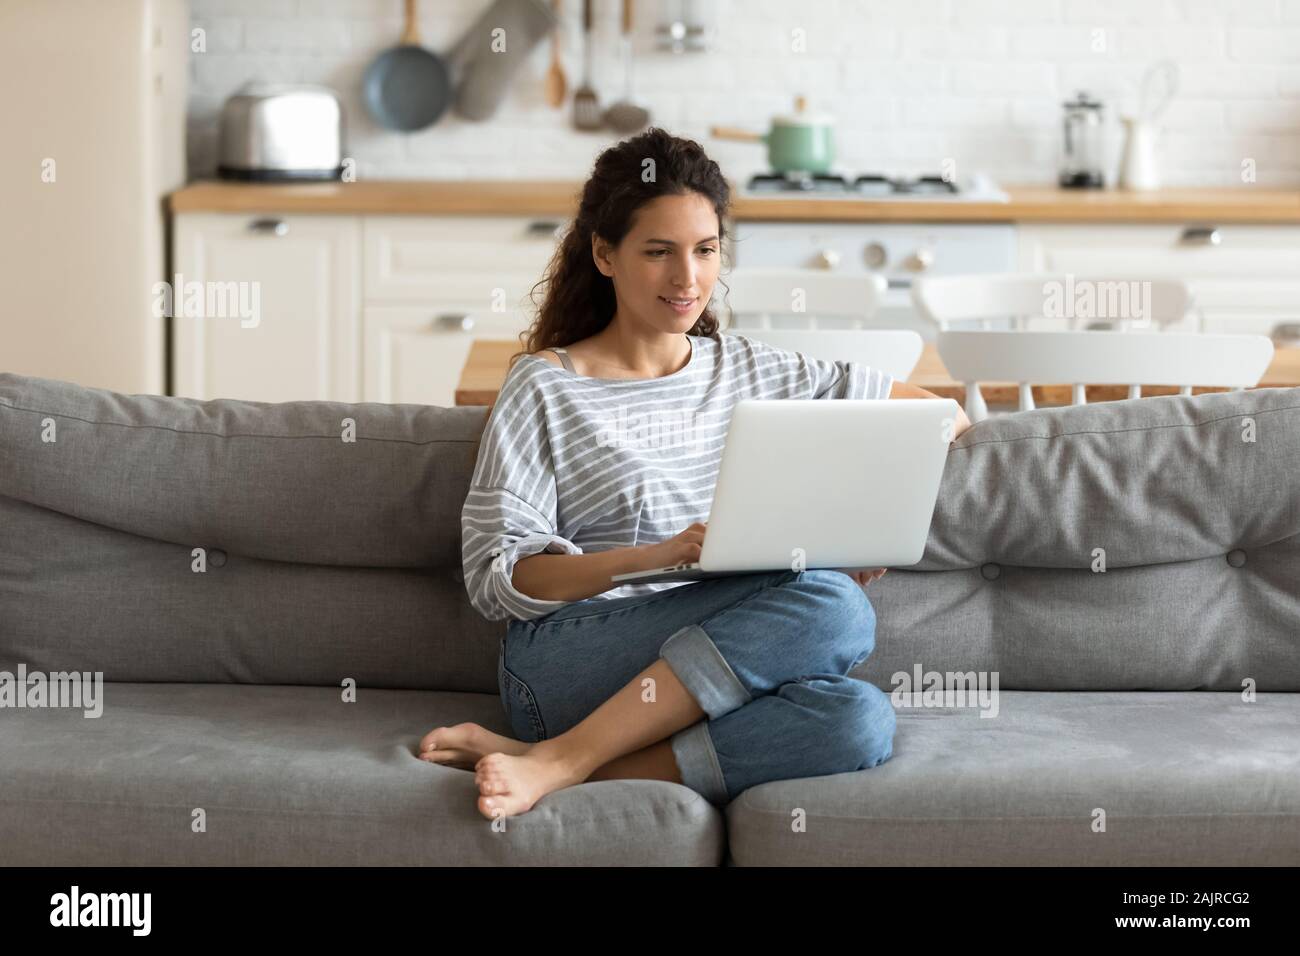 Female holding on lap notebook looking at screen writing email Stock Photo